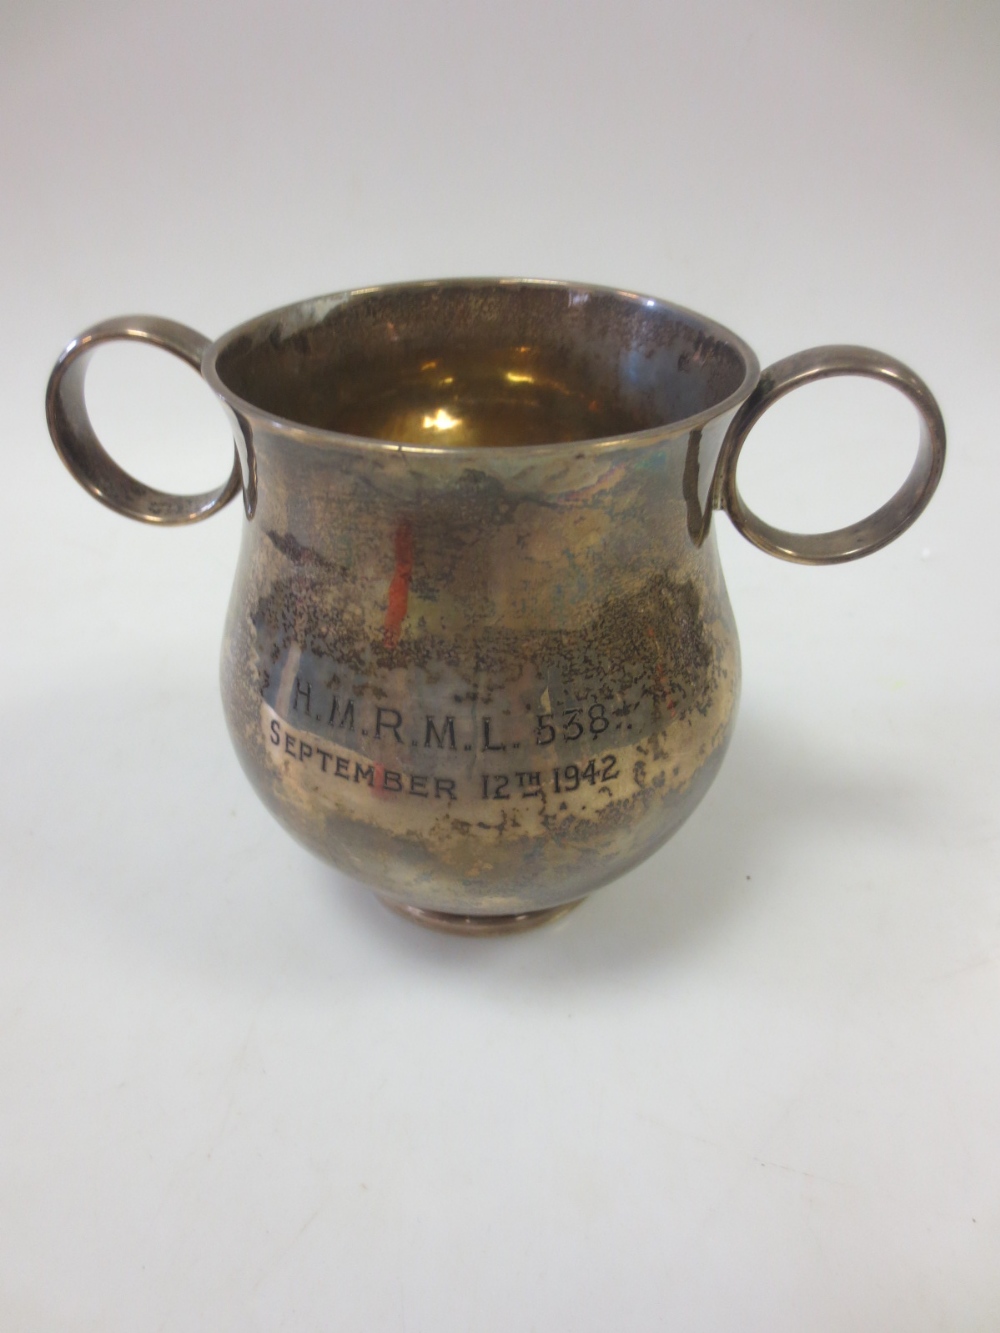 A silver trophy cup with two handles